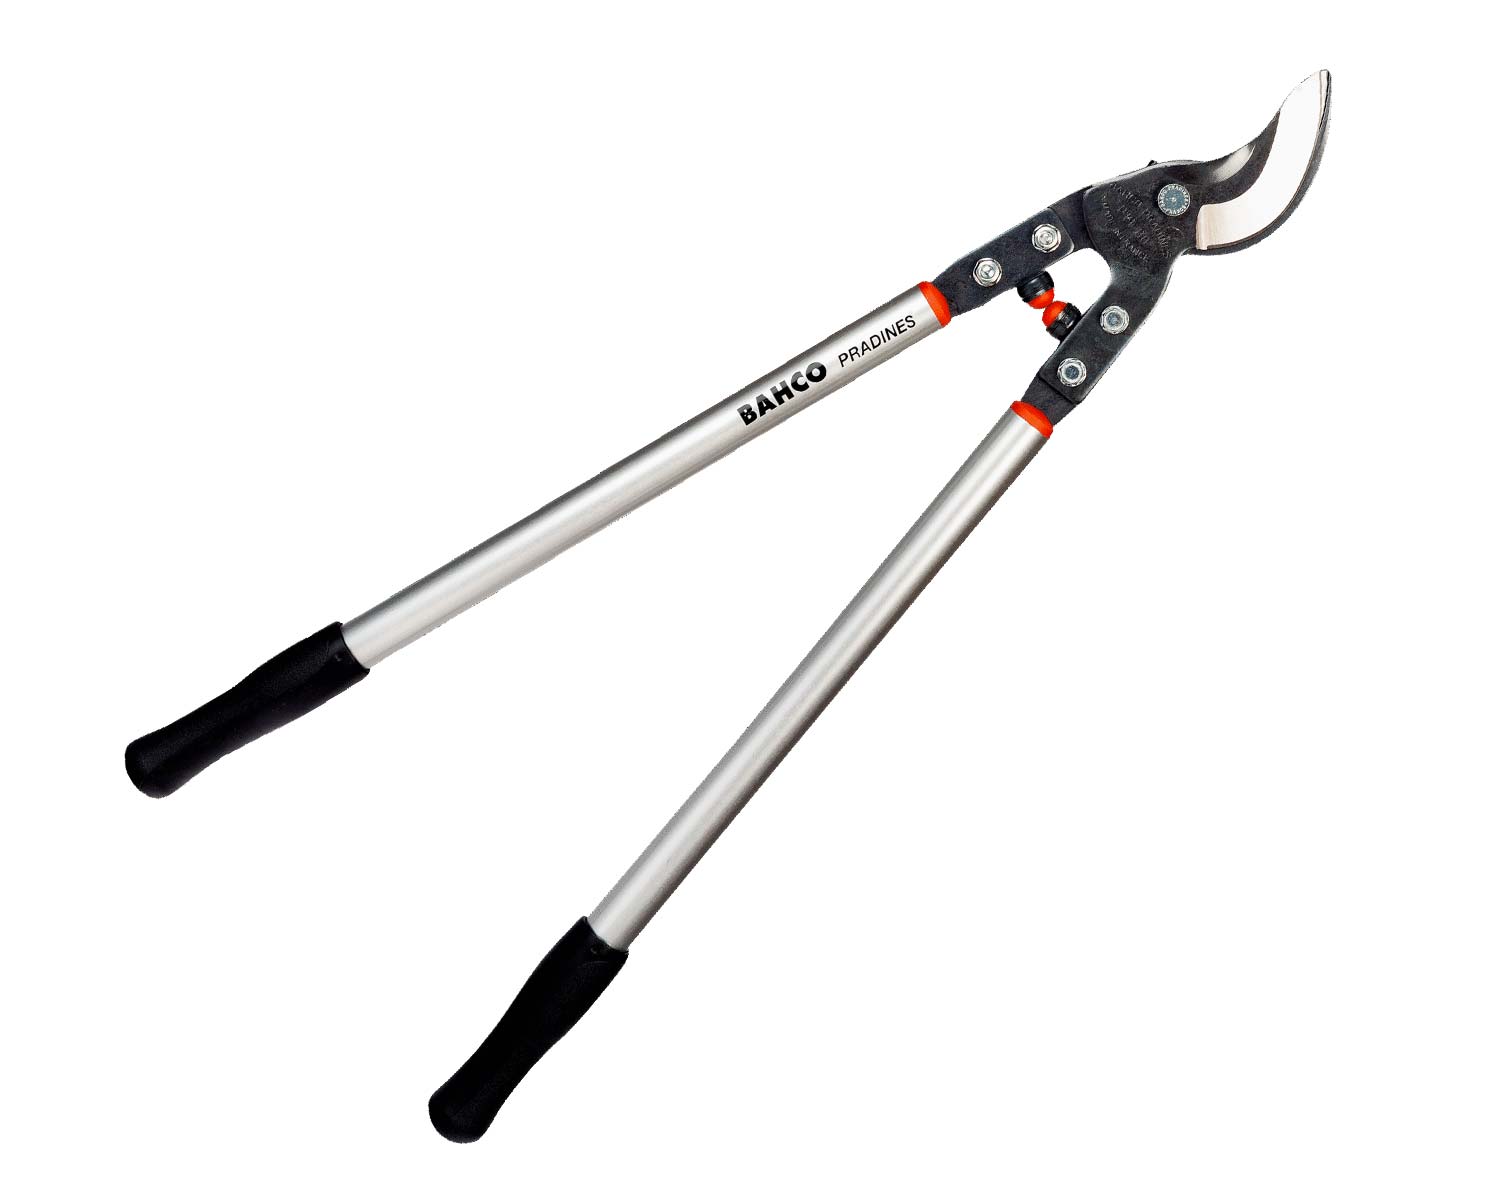 Professional ByPass Loppers Long Handles BAHCO